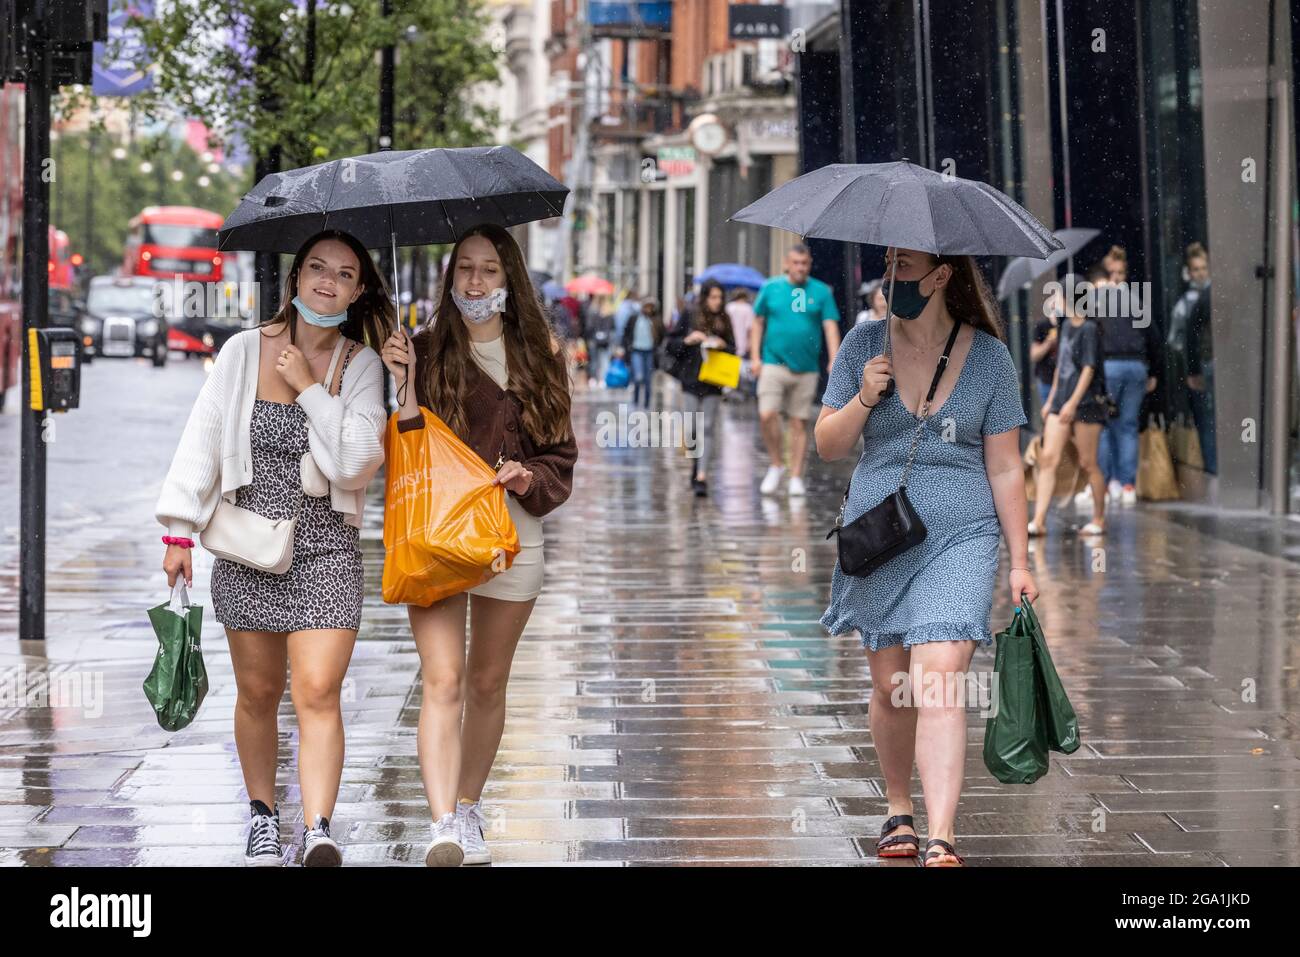 London, UK. July 28 2021: Heavy Rain Showers, Central London, England, UK Picture shows young girls taking cover underneath their umbrella from the rain along Oxford Street as heavy rain showers sweep across Central London and southern parts of England. Credit: Clickpics/Alamy Live News Stock Photo